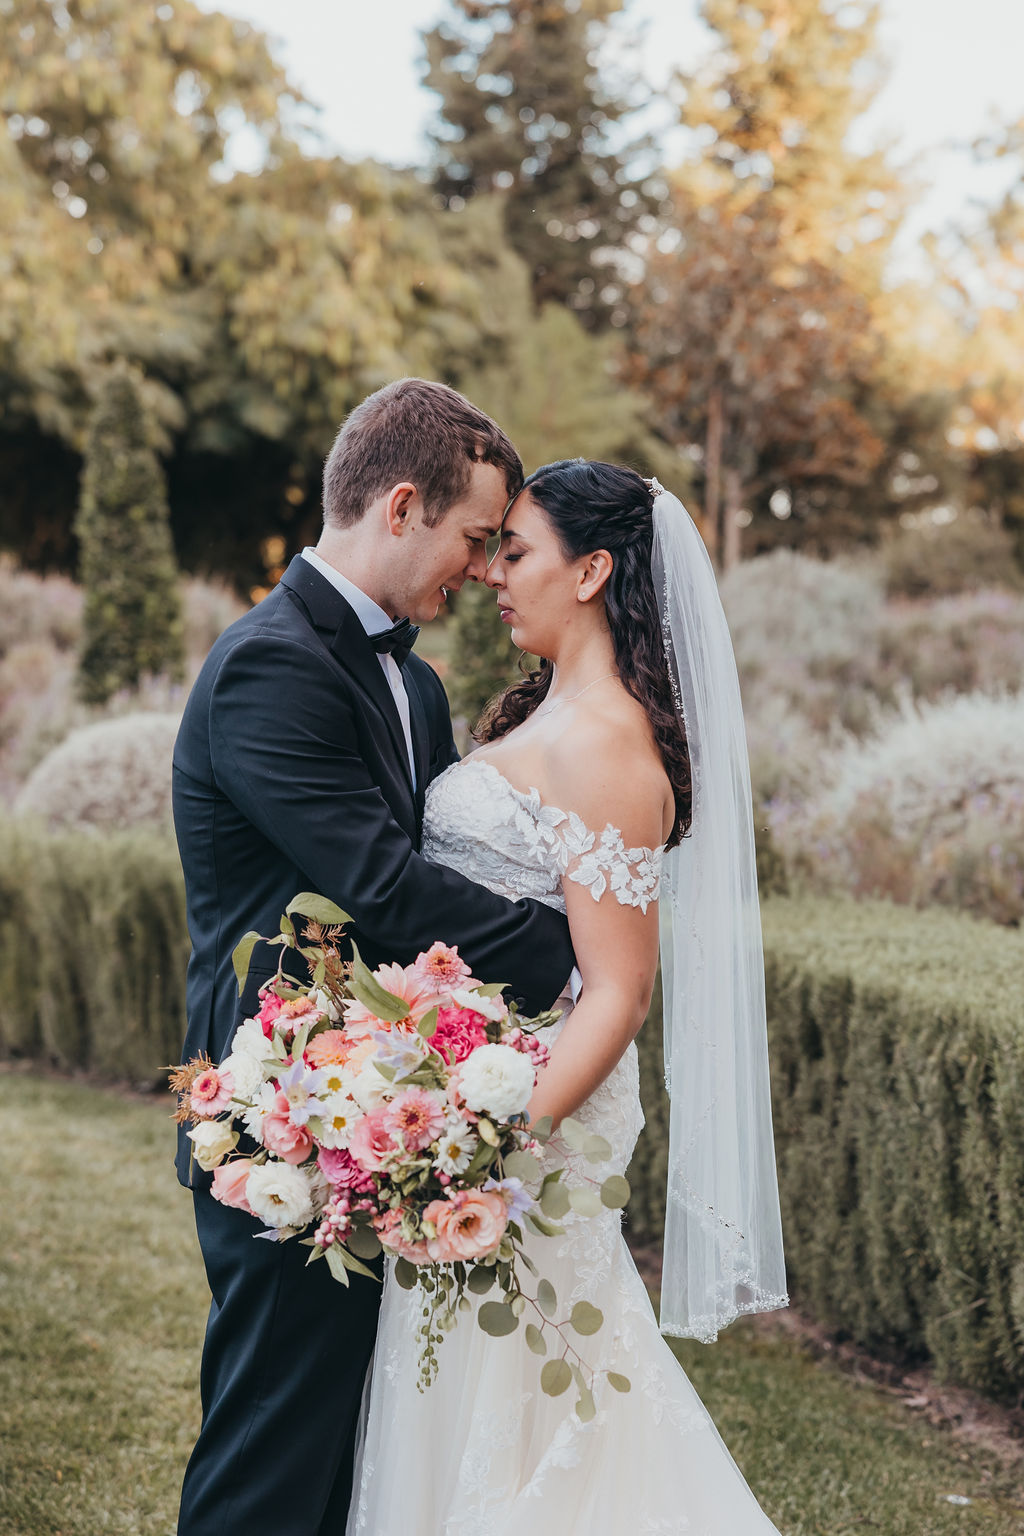 A bride and groom holding each other and looking into each other’s eyes, standing in a garden. the bride is holding a large bouquet of flowers.